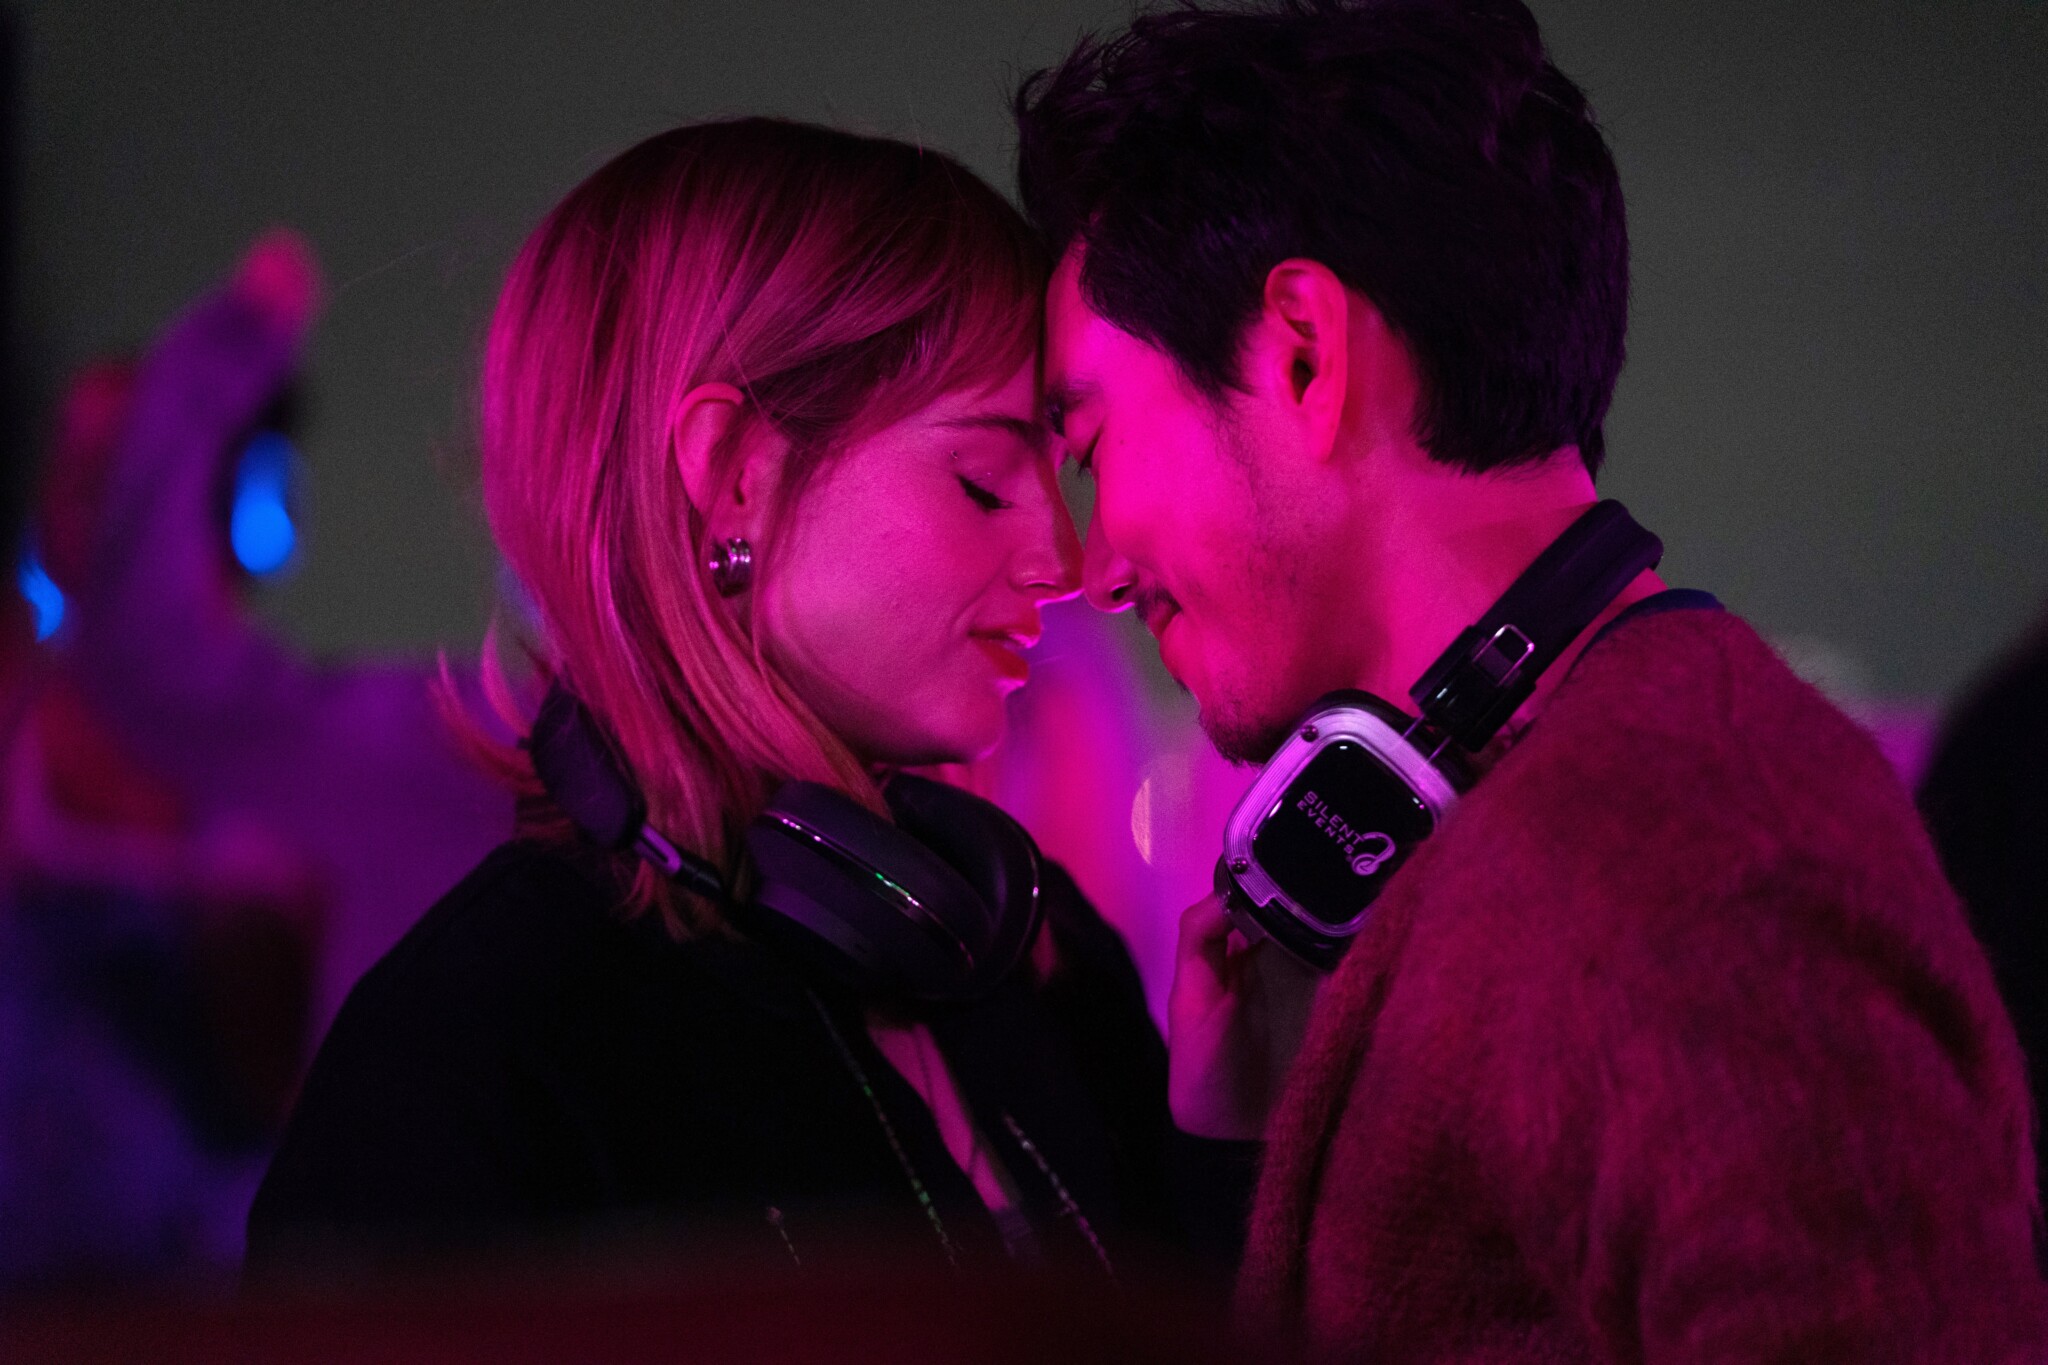 Lucy Boynton and Justin H. Min in "The Greatest Hits" stand with their foreheads together, with headphones around their necks.